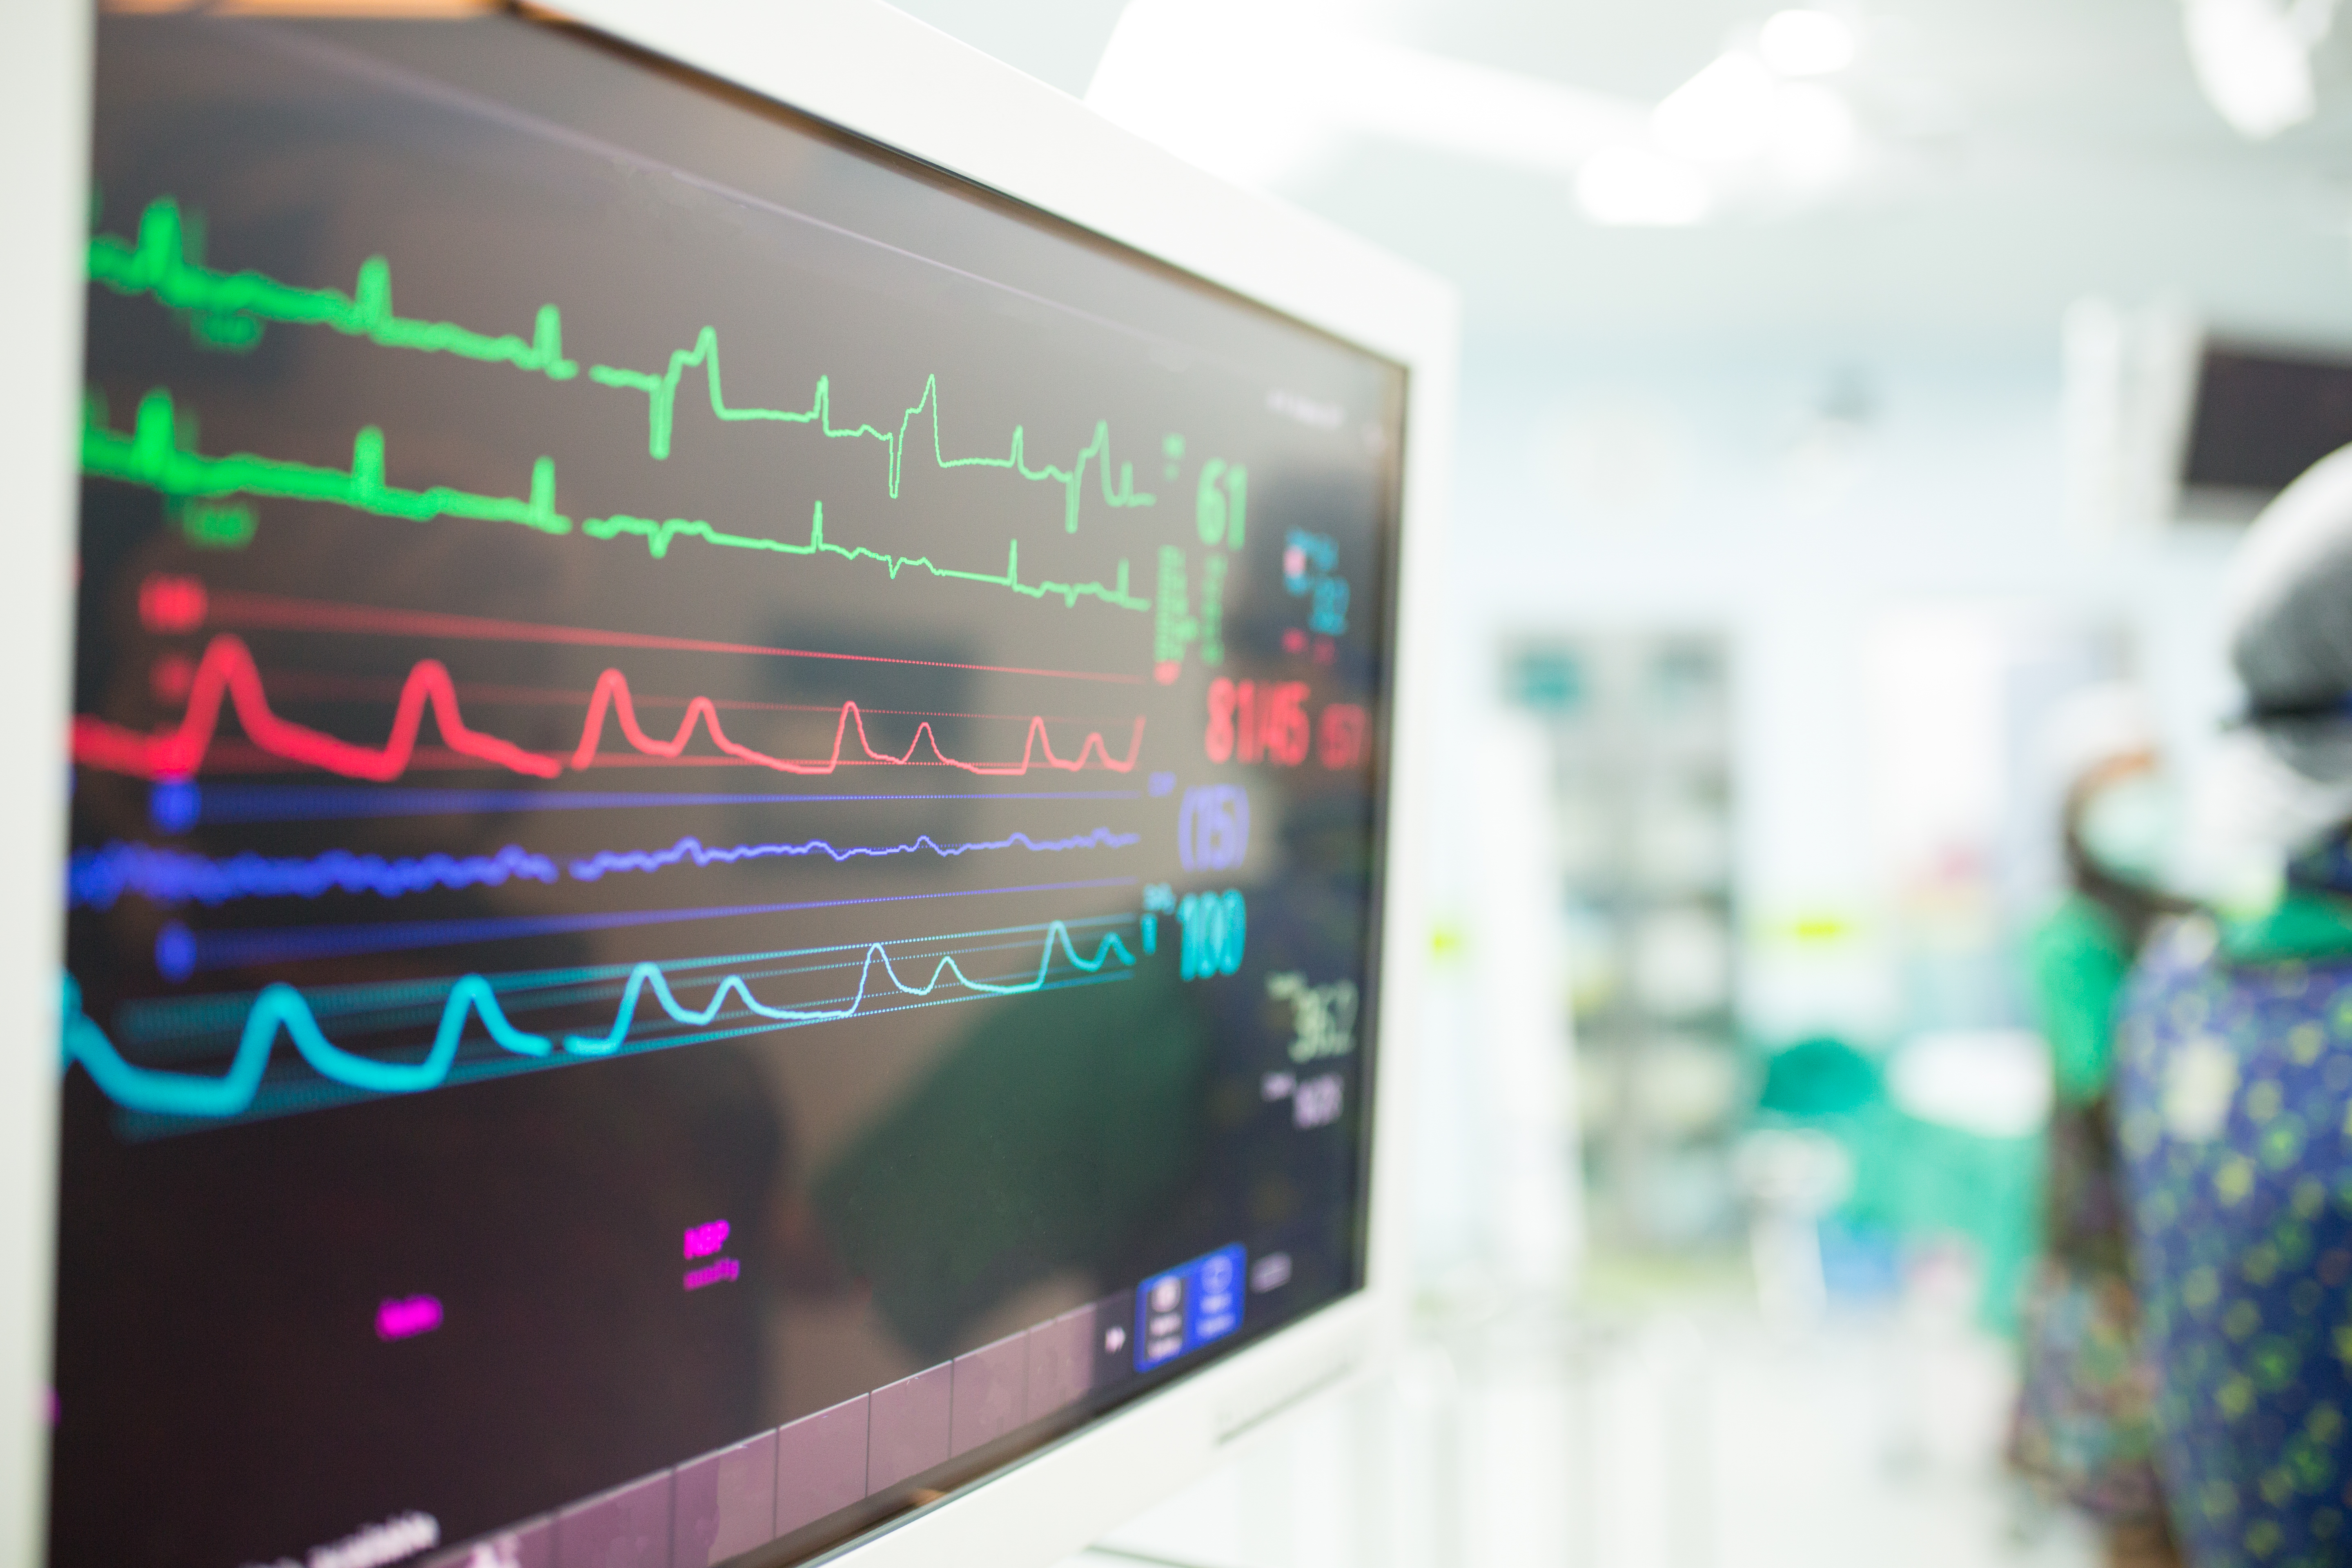 Monitor heart rate for surgery in operate room | Source: Shutterstock